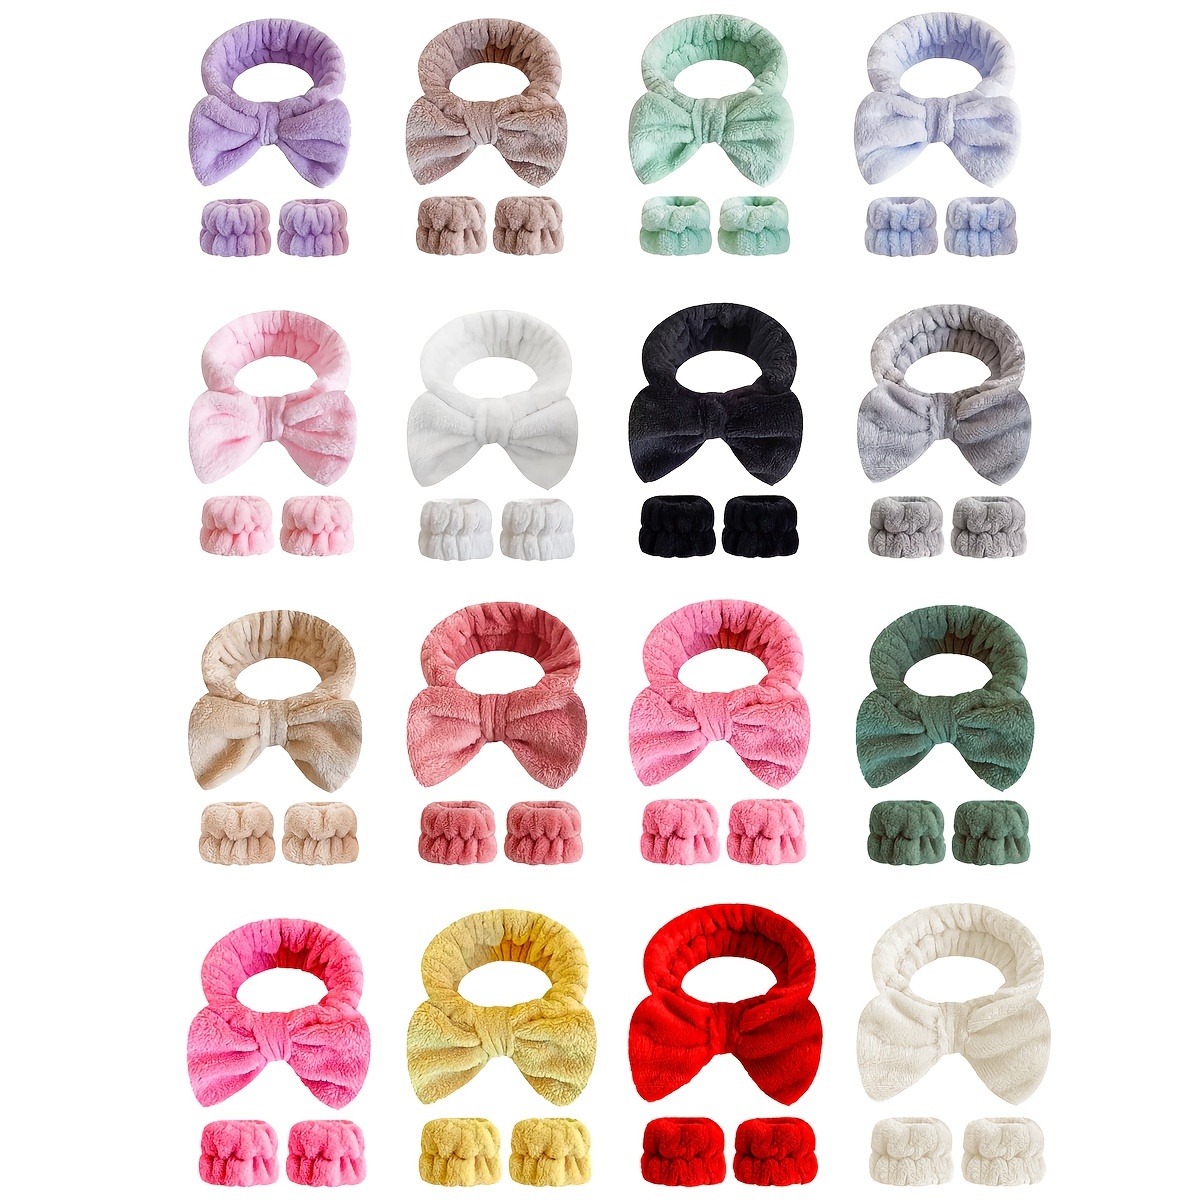 

3pc/set Macaron Wrist Band Elastic Cute Bowknot Decorative Head Band Water Absorbent Head Hoop For Face Washing Spa Skin Care Makeup